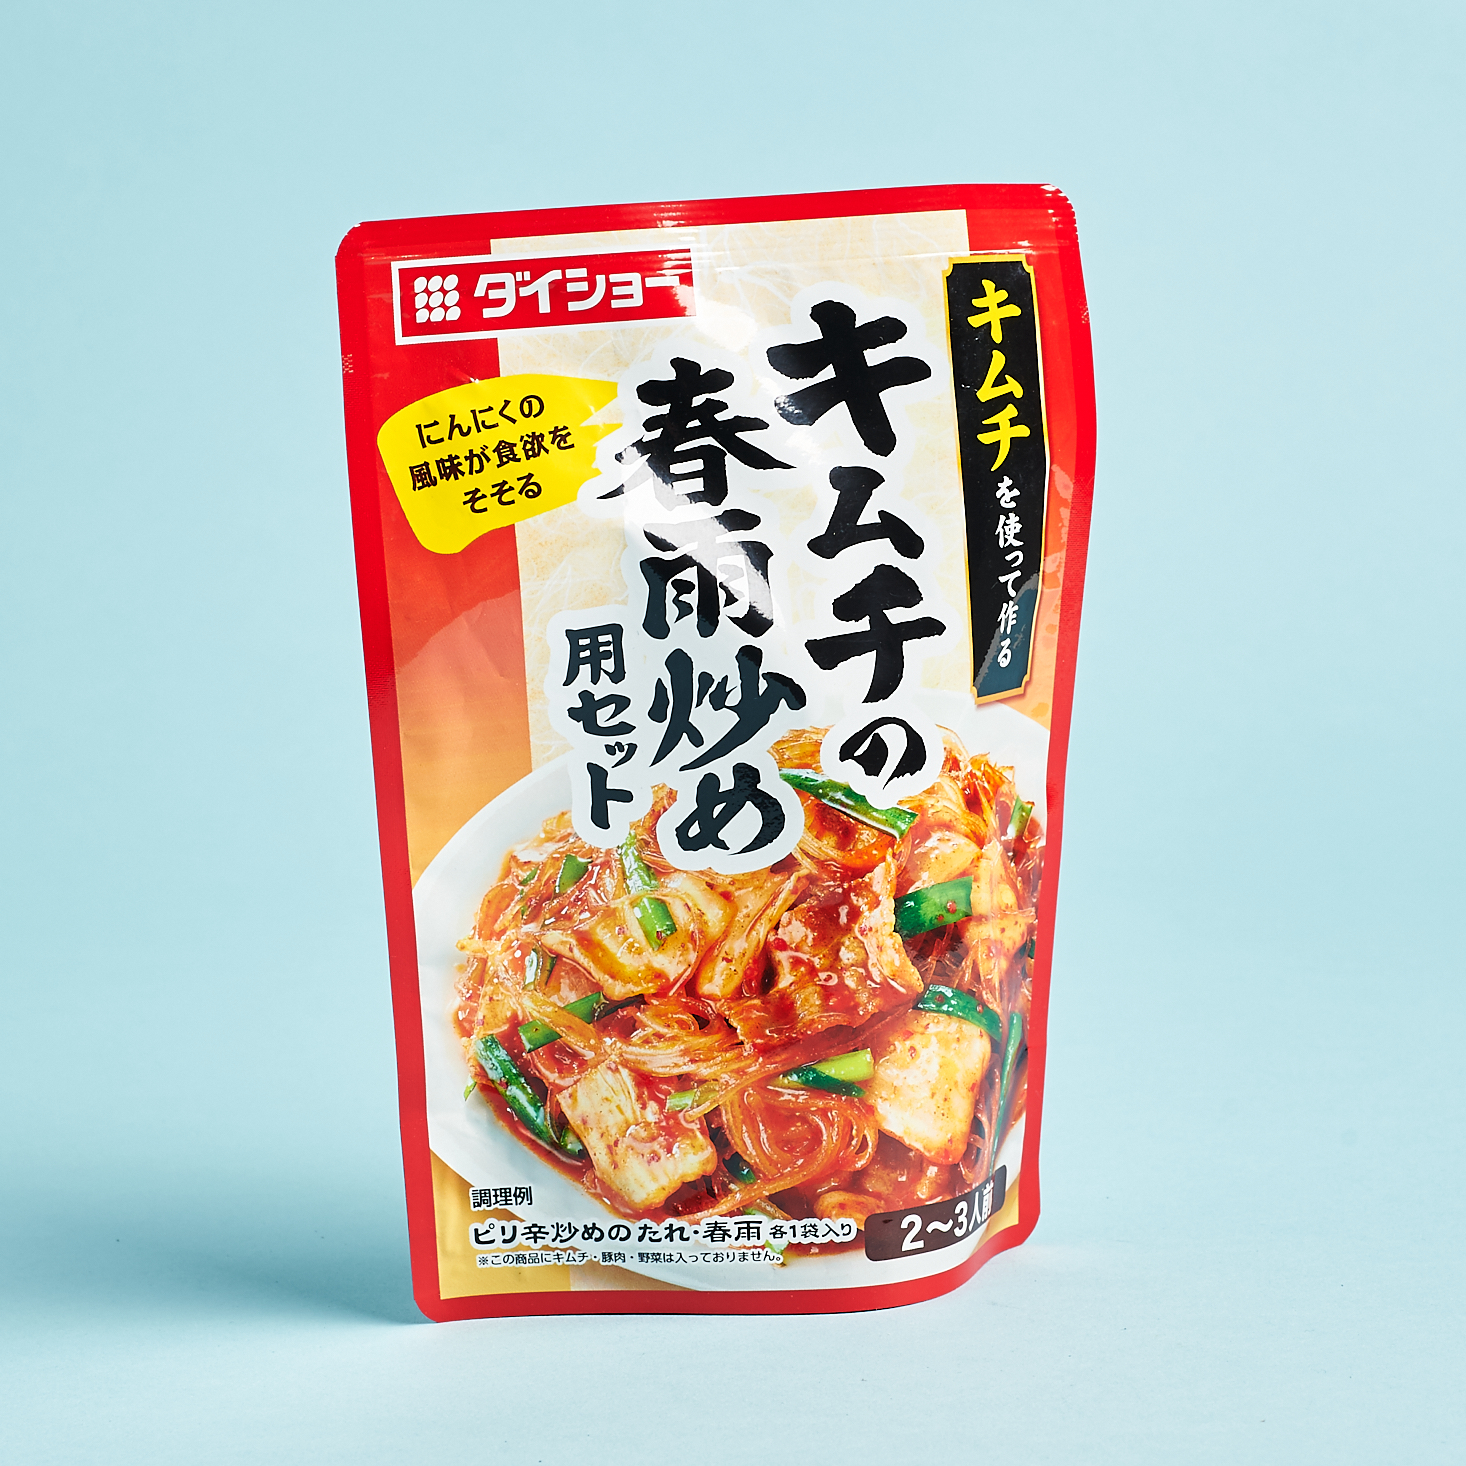 kimchi vermicelli package front